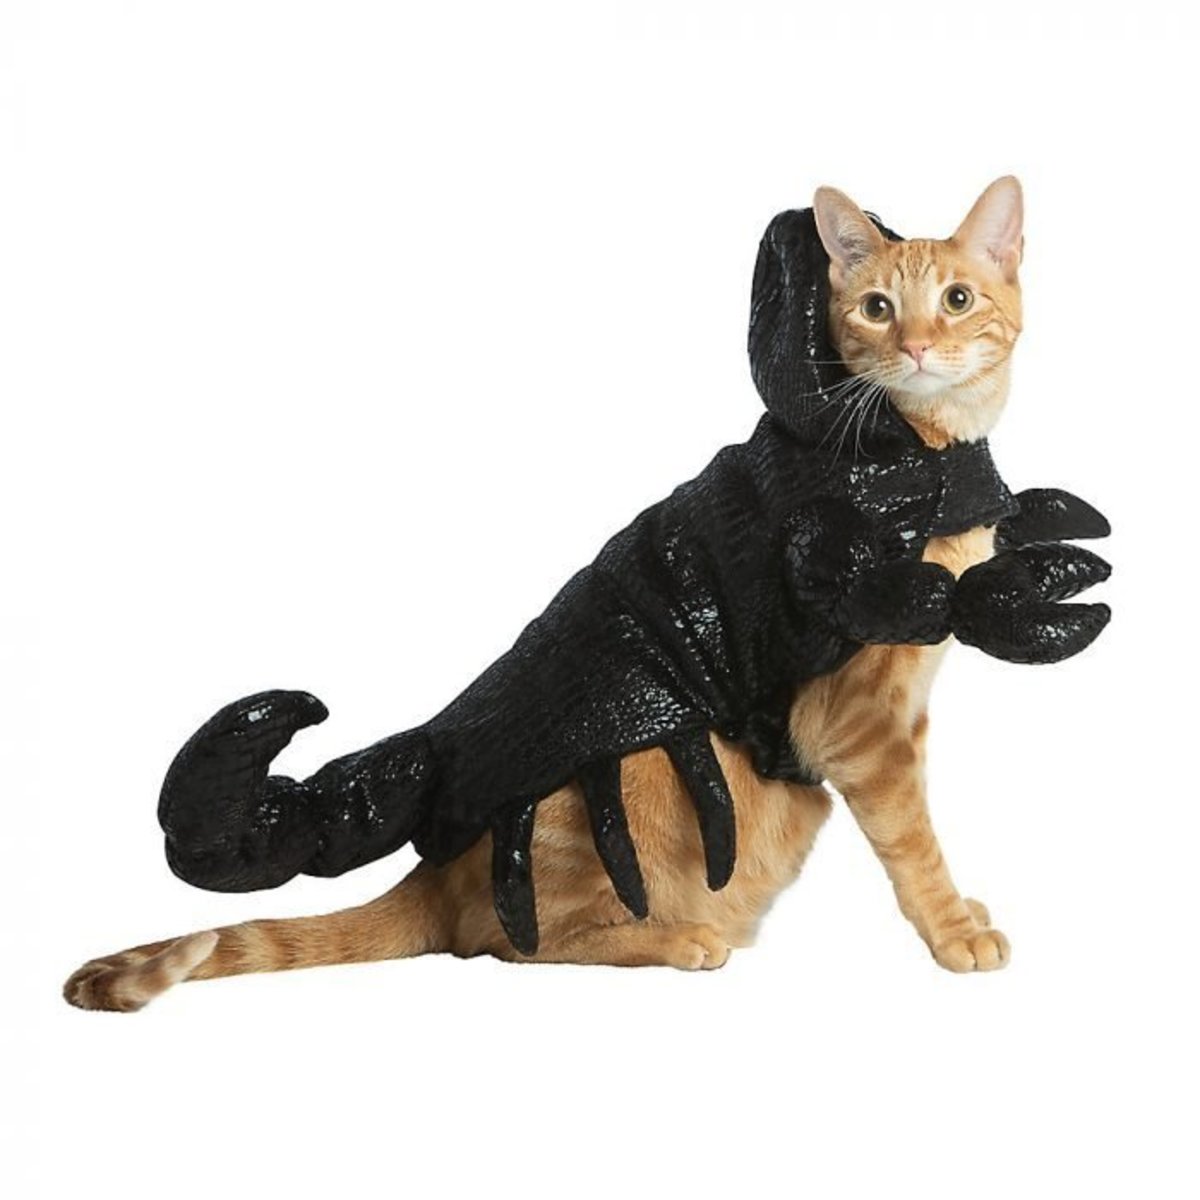 35 Cat Halloween Costumes — Funny Halloween Costumes for Cats - Parade Pets